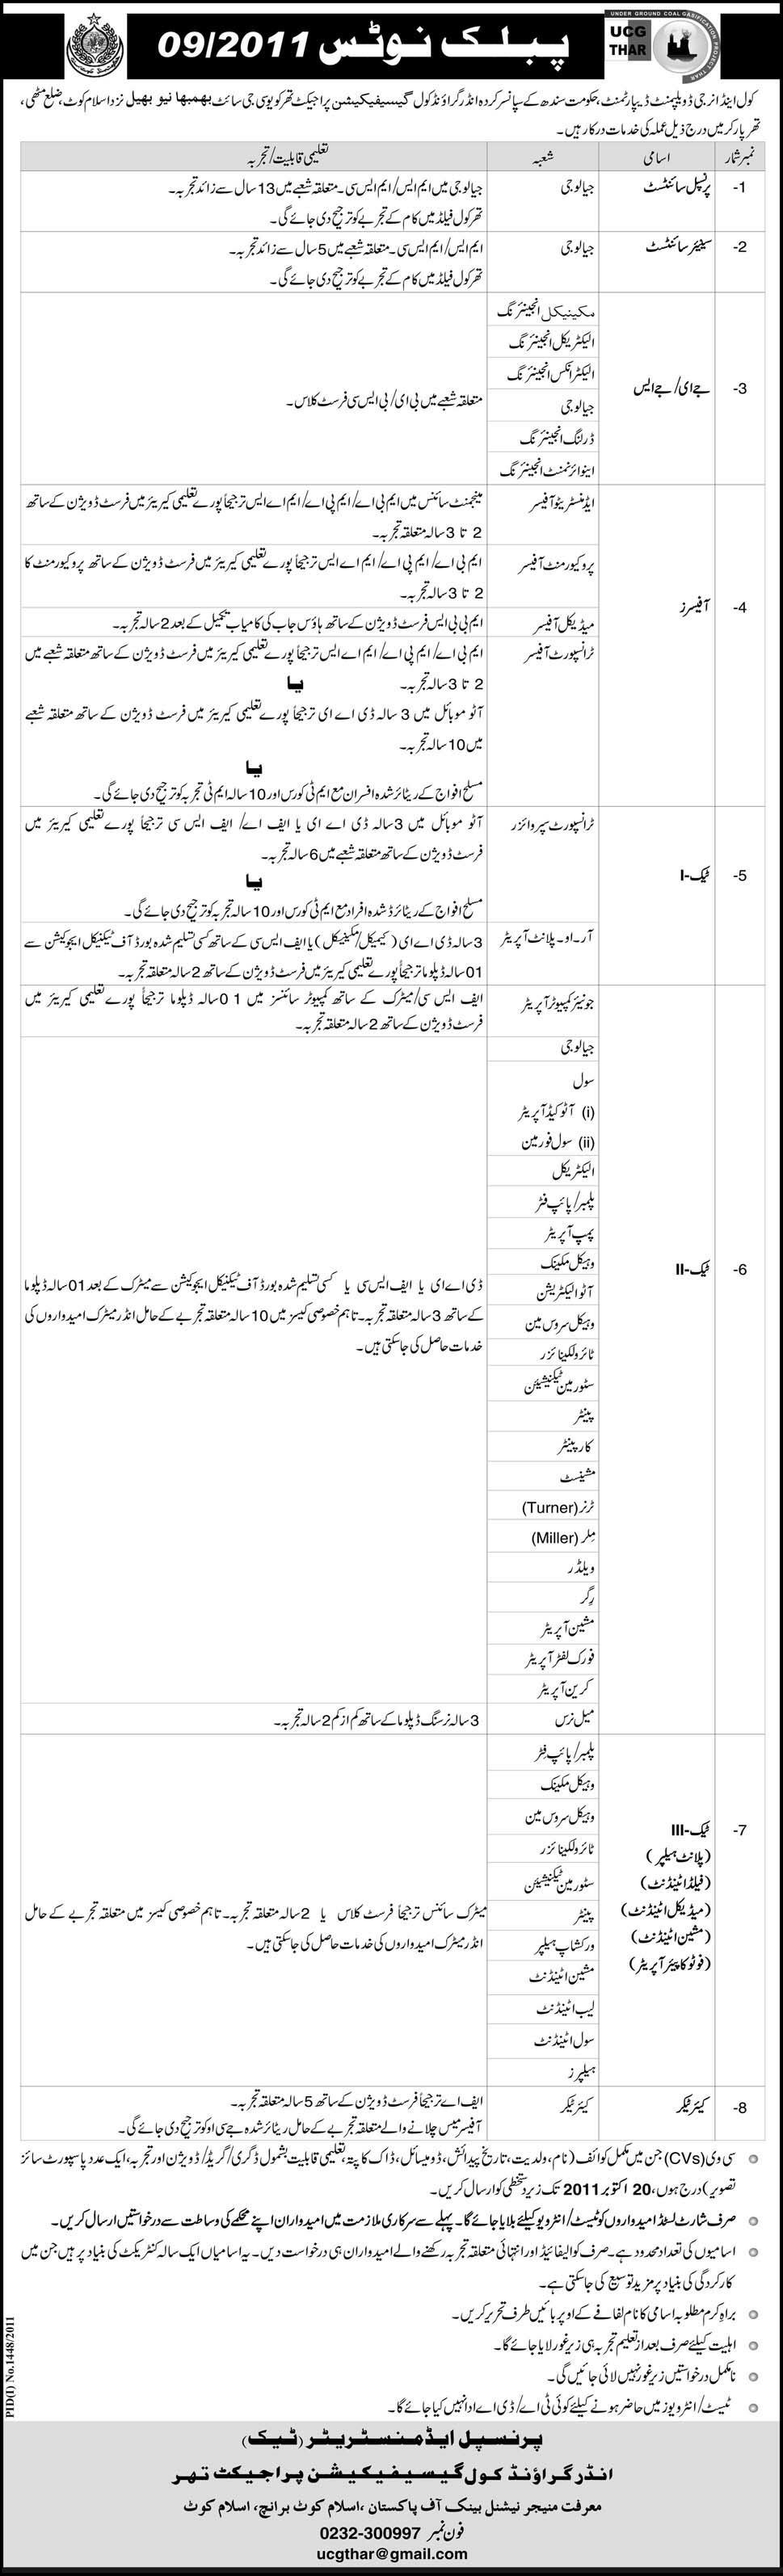 Coal and Energy Development Department, Government of Sindh Positions Vacant